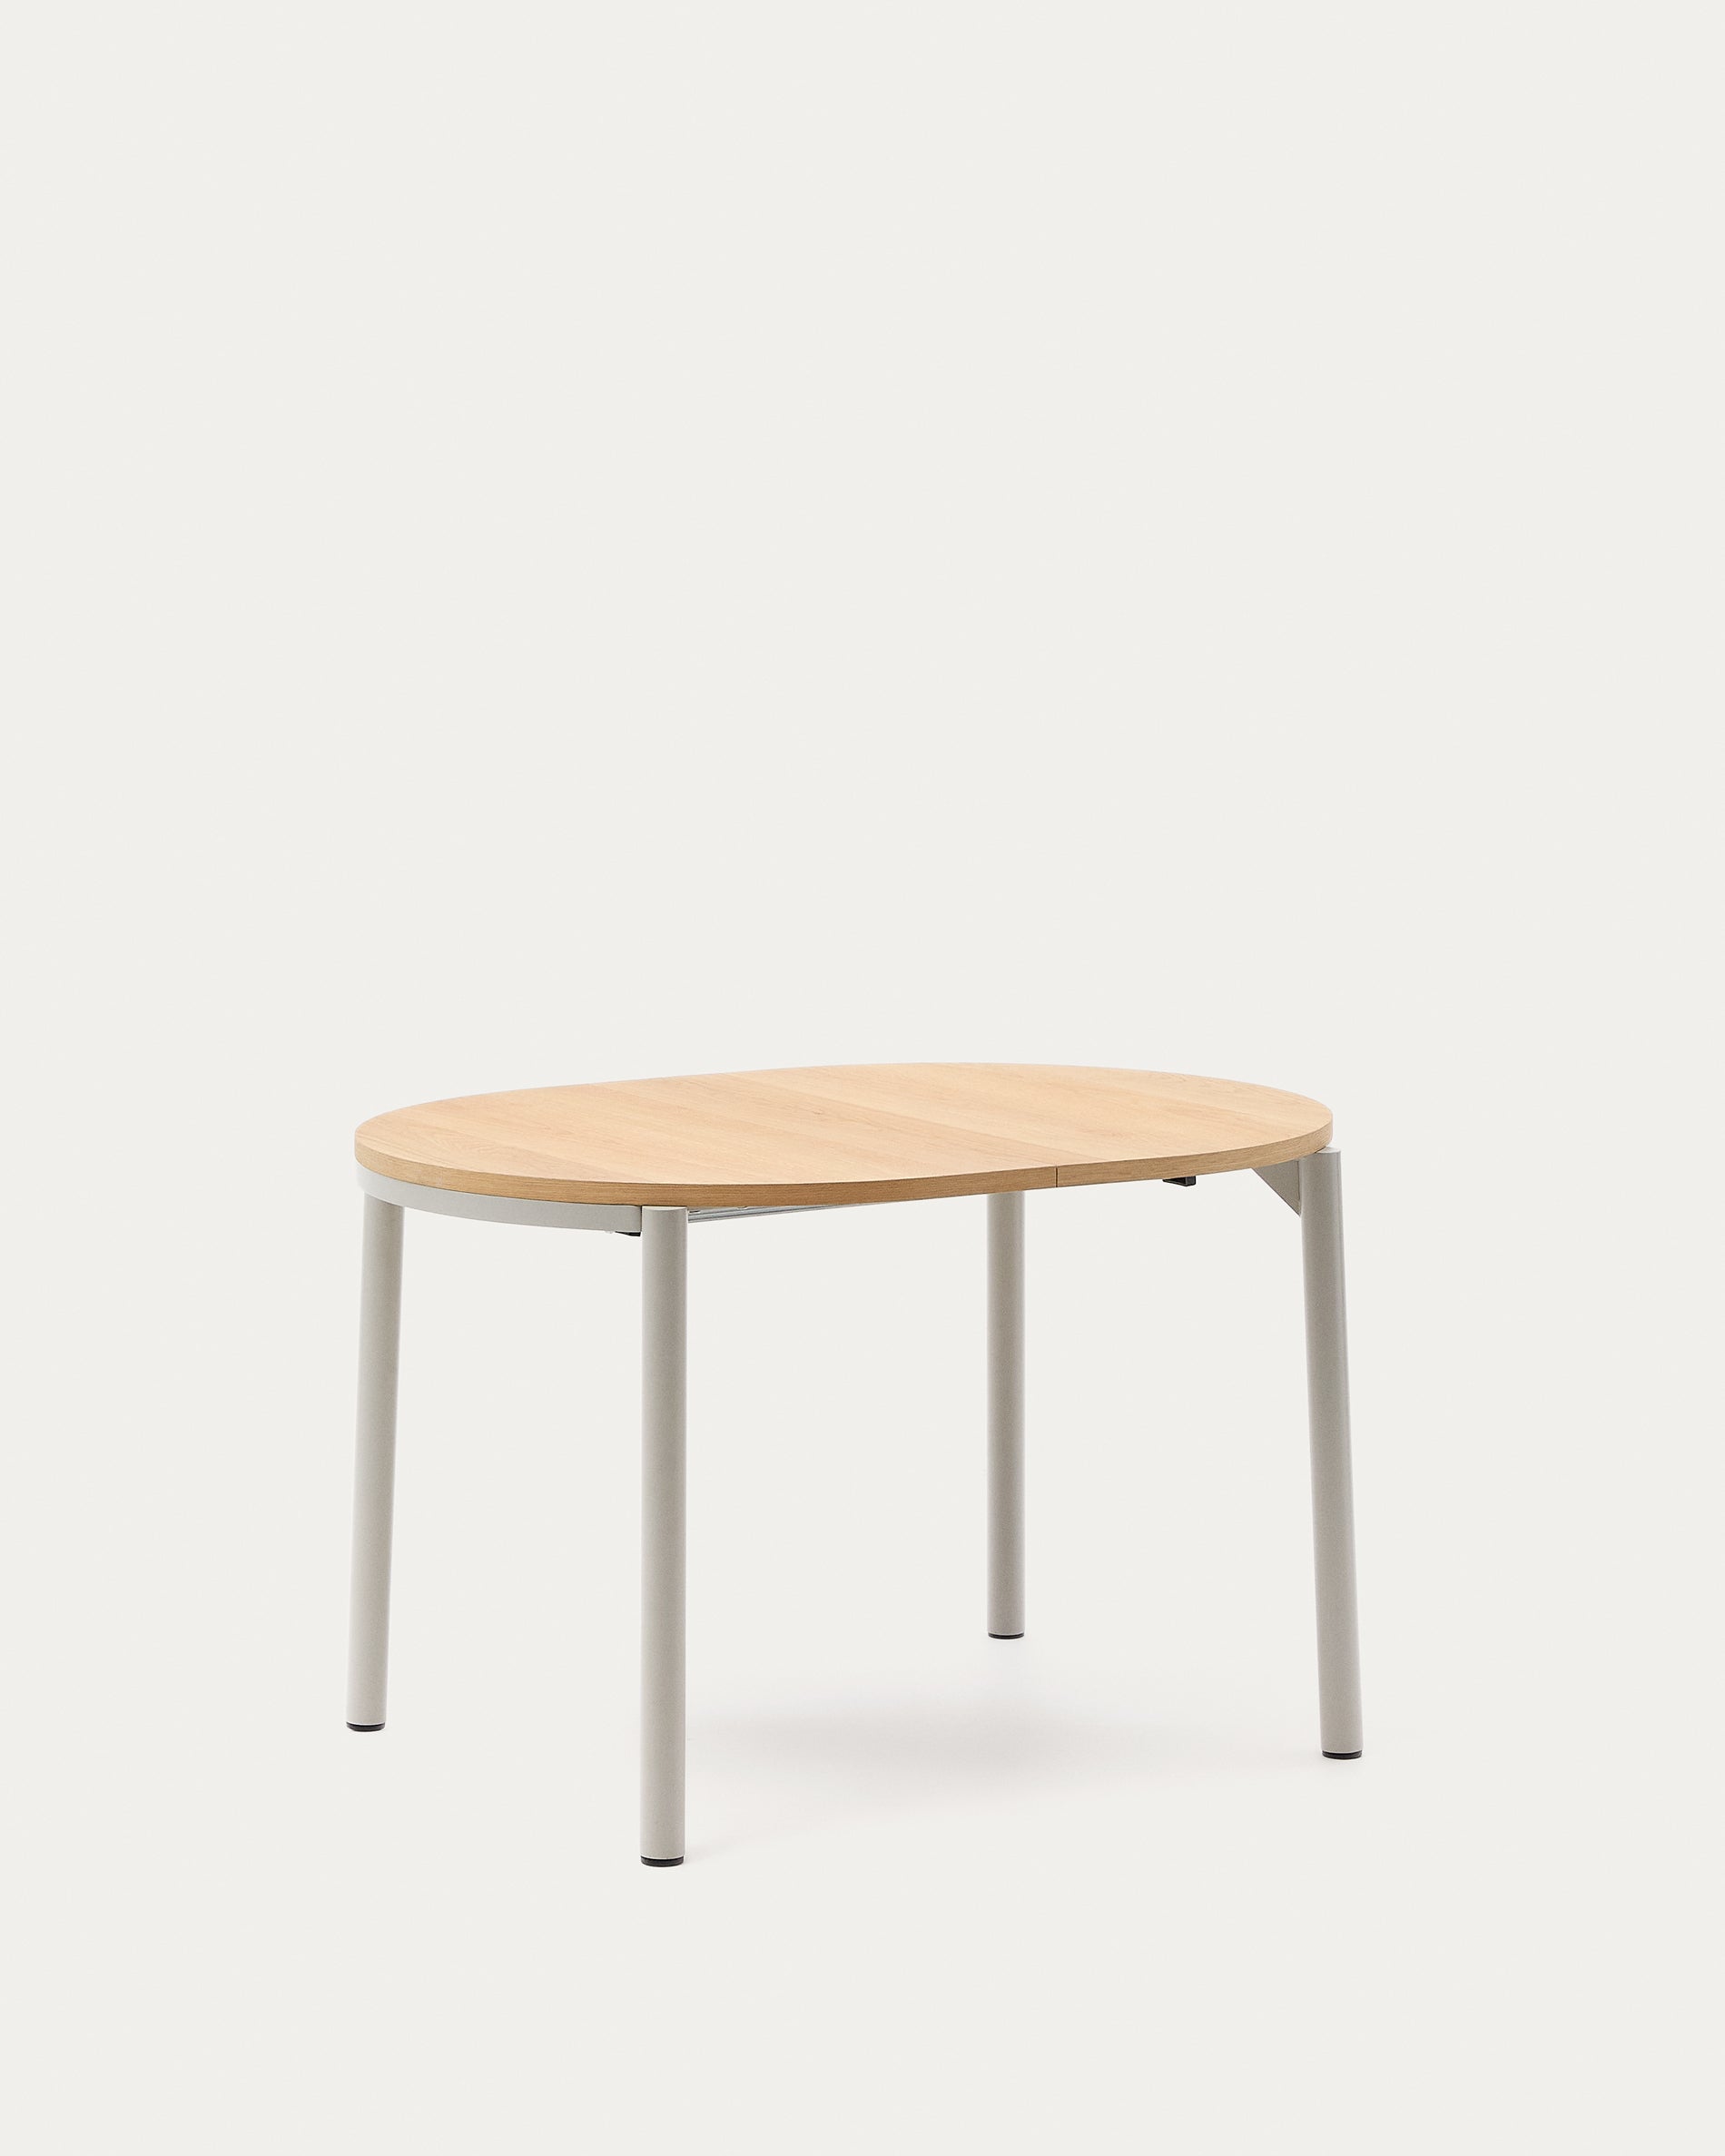 Montuiri round extendable table with oak veneer and gray finished steel legs, 120(160) x 90 cm